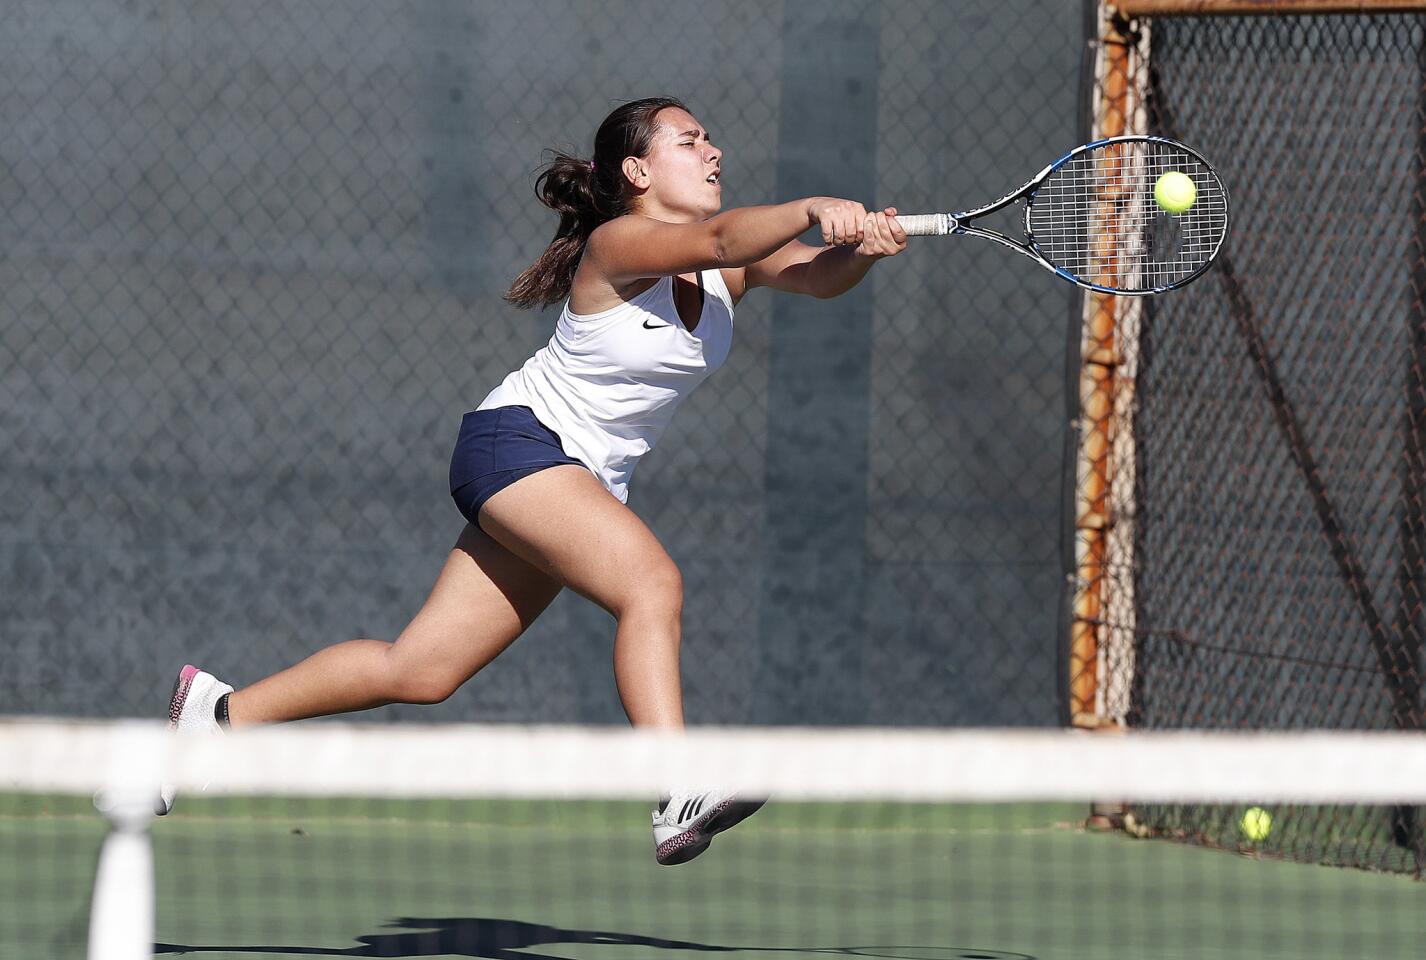 Crescenta Valley's Melika Seyed Mouhammad Lou leaps at an Arcadia return to hit it into play in a Pacific League girls' tennis match at Crescenta Valley High School on Tuesday, October 16, 2018.